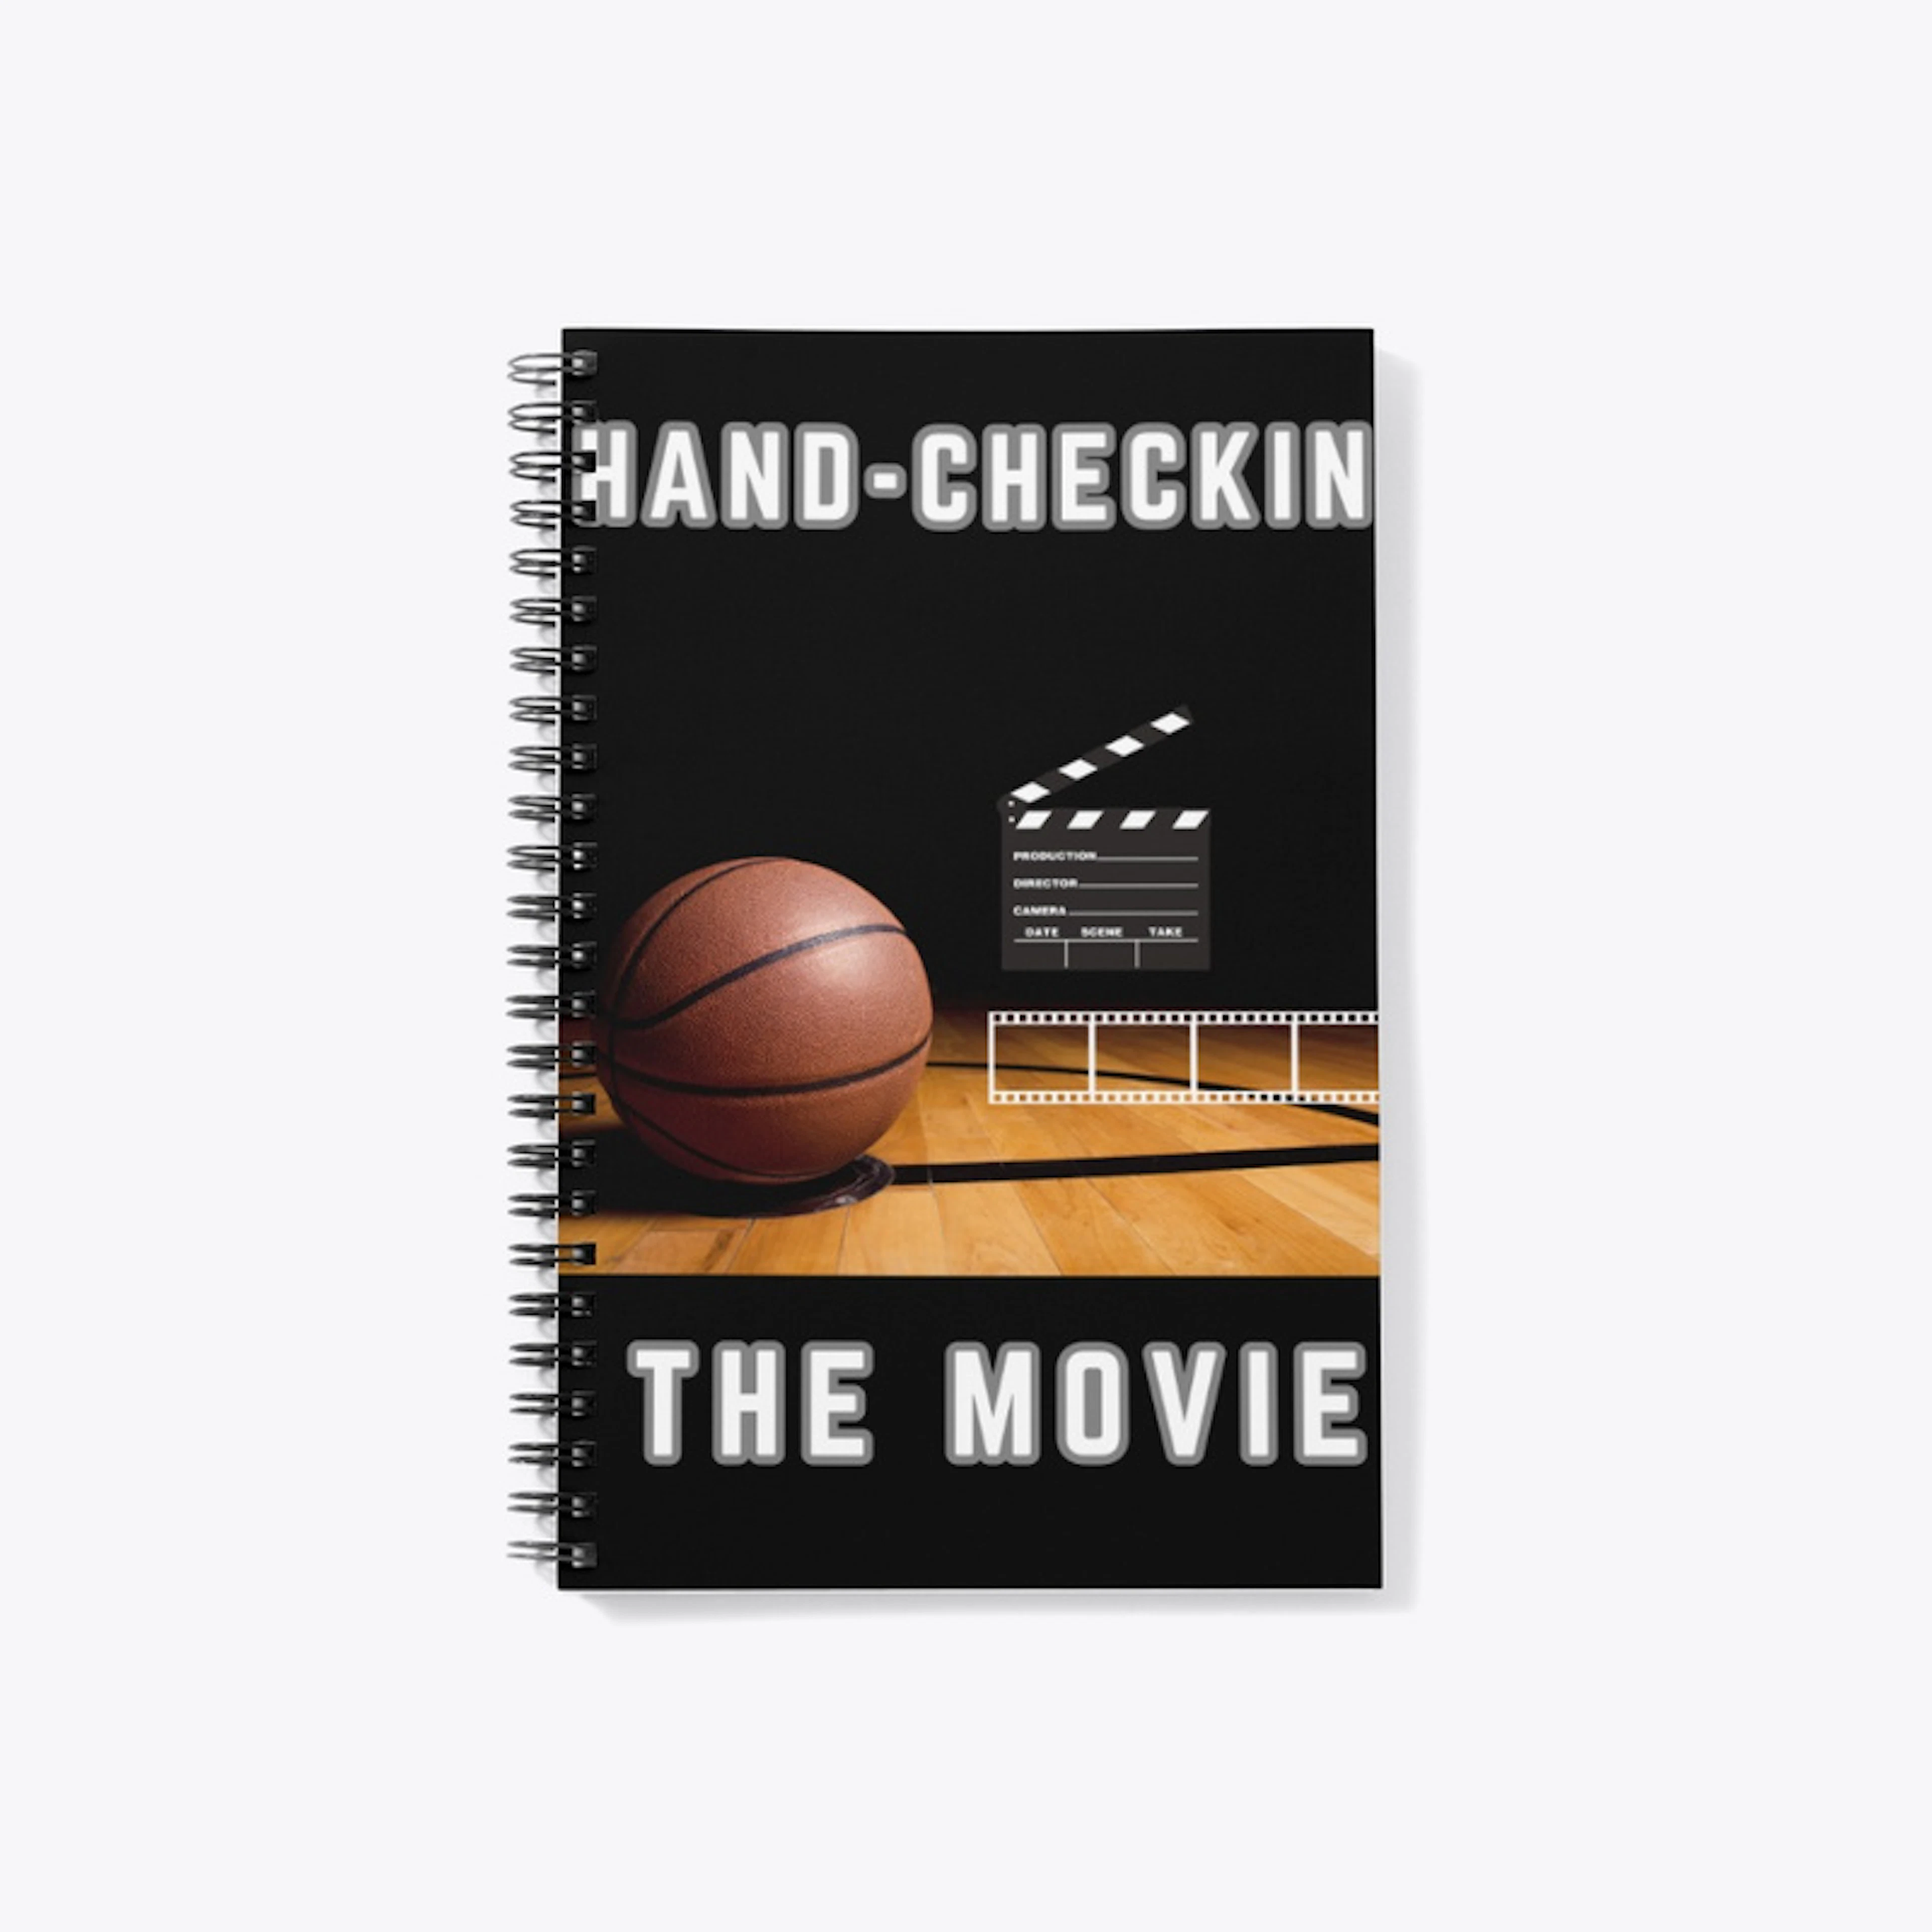 HAND-CHECKING: THE MOVIE